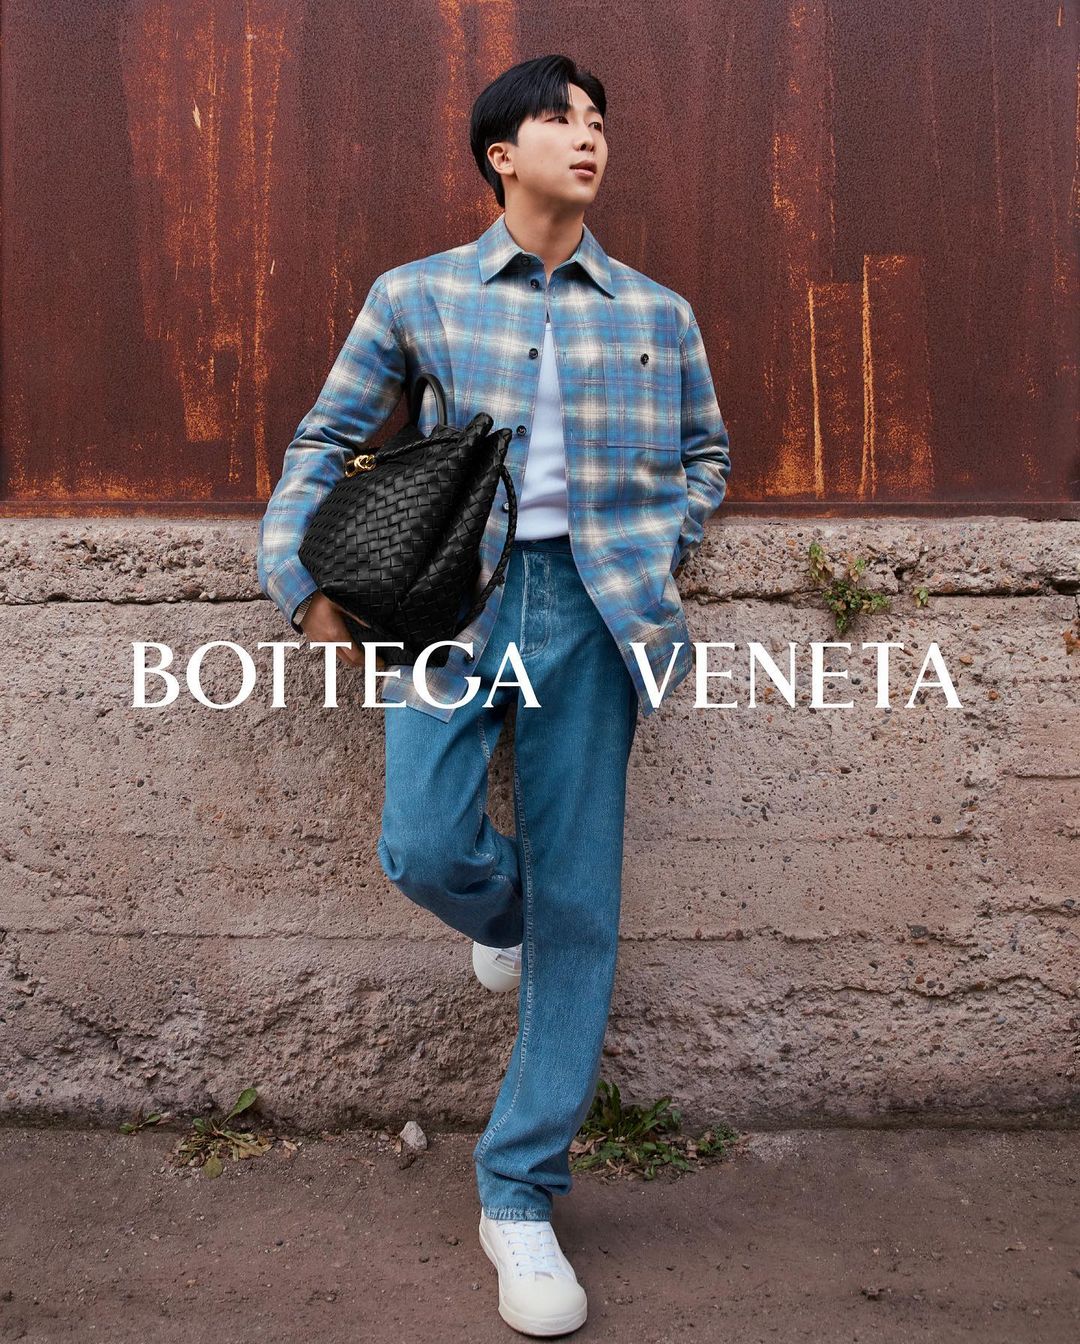 RM shares a message to his army from the Bottega Veneta AW23 show! 🥺